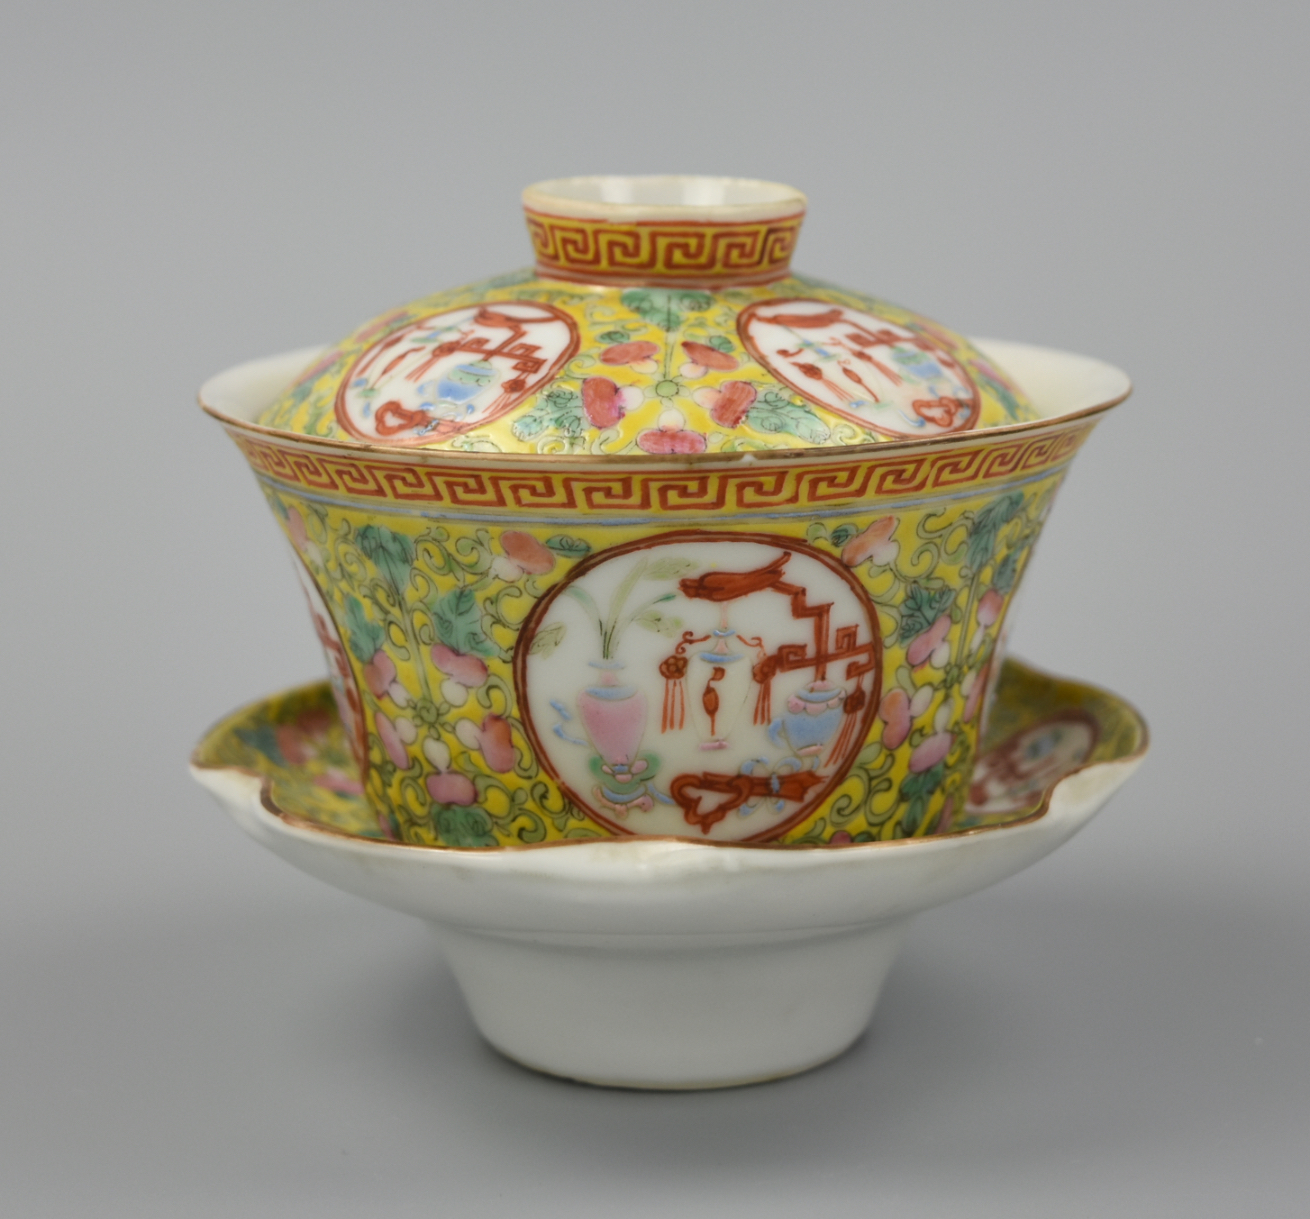 CHINESE FAMILLE ROSE YELLOW TEACUP 2cf173